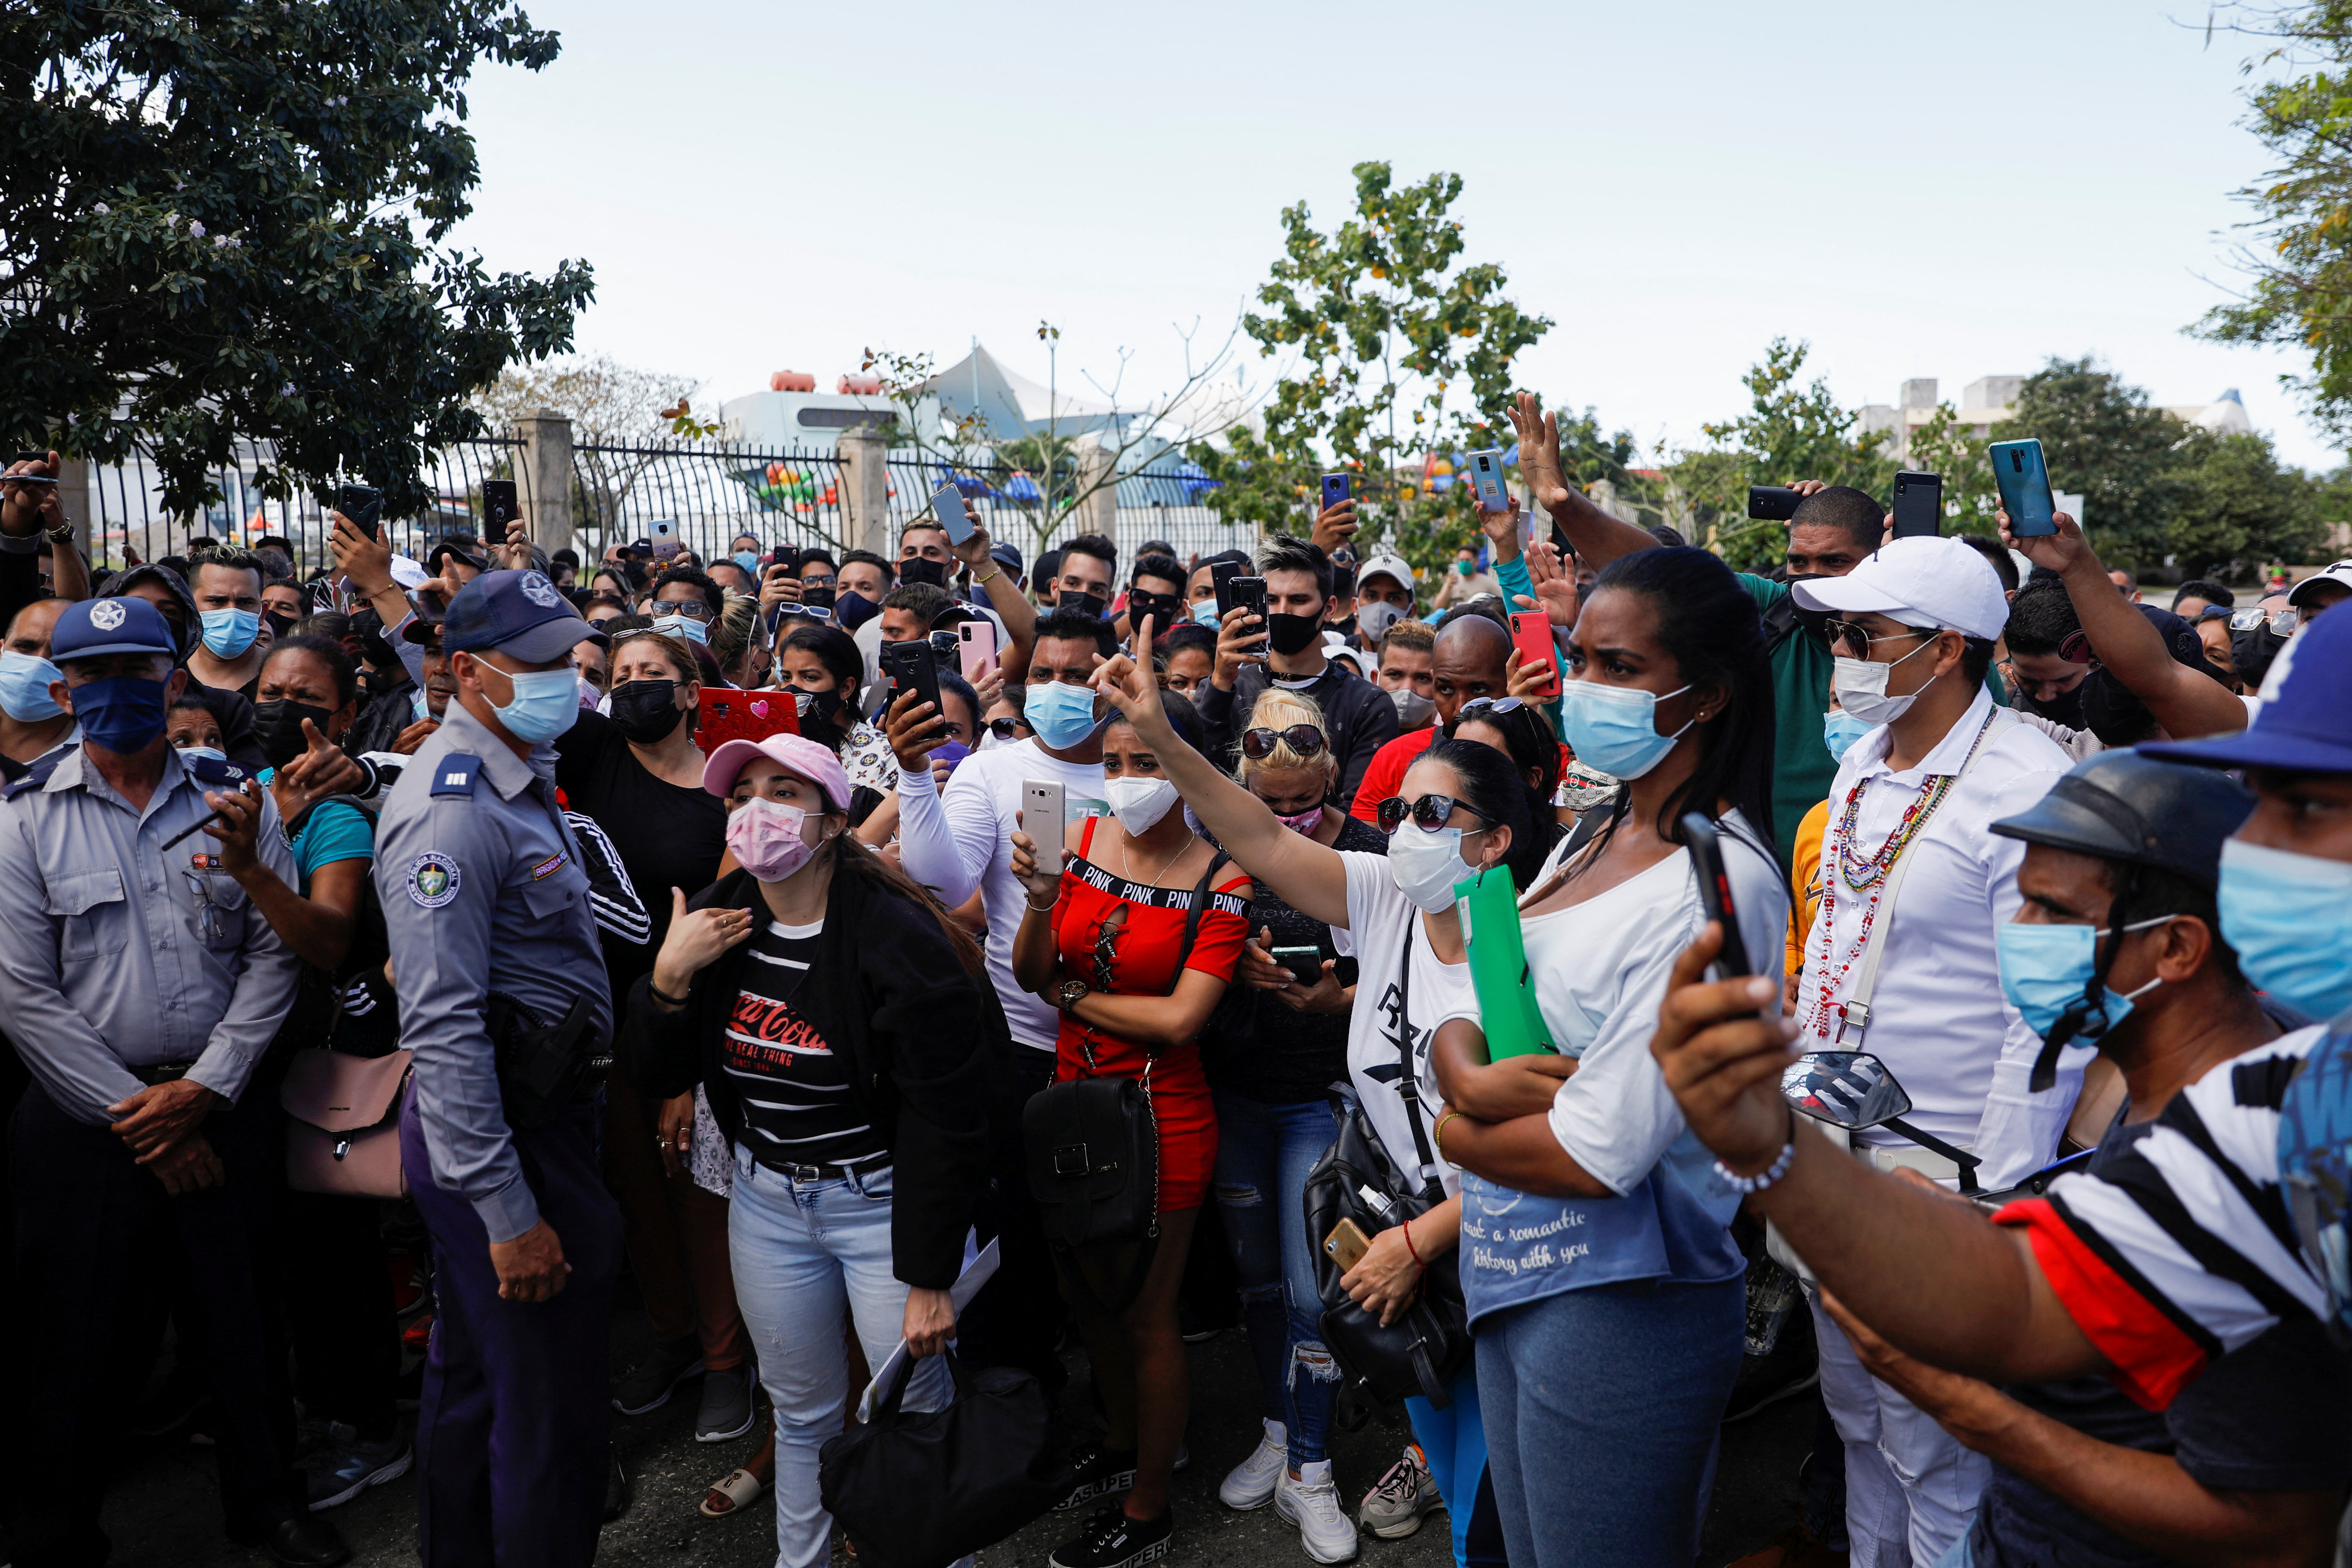 People crowd near Costa Rica embassy after the country imposed visa requirements for Cubans as migration surges, in Havana